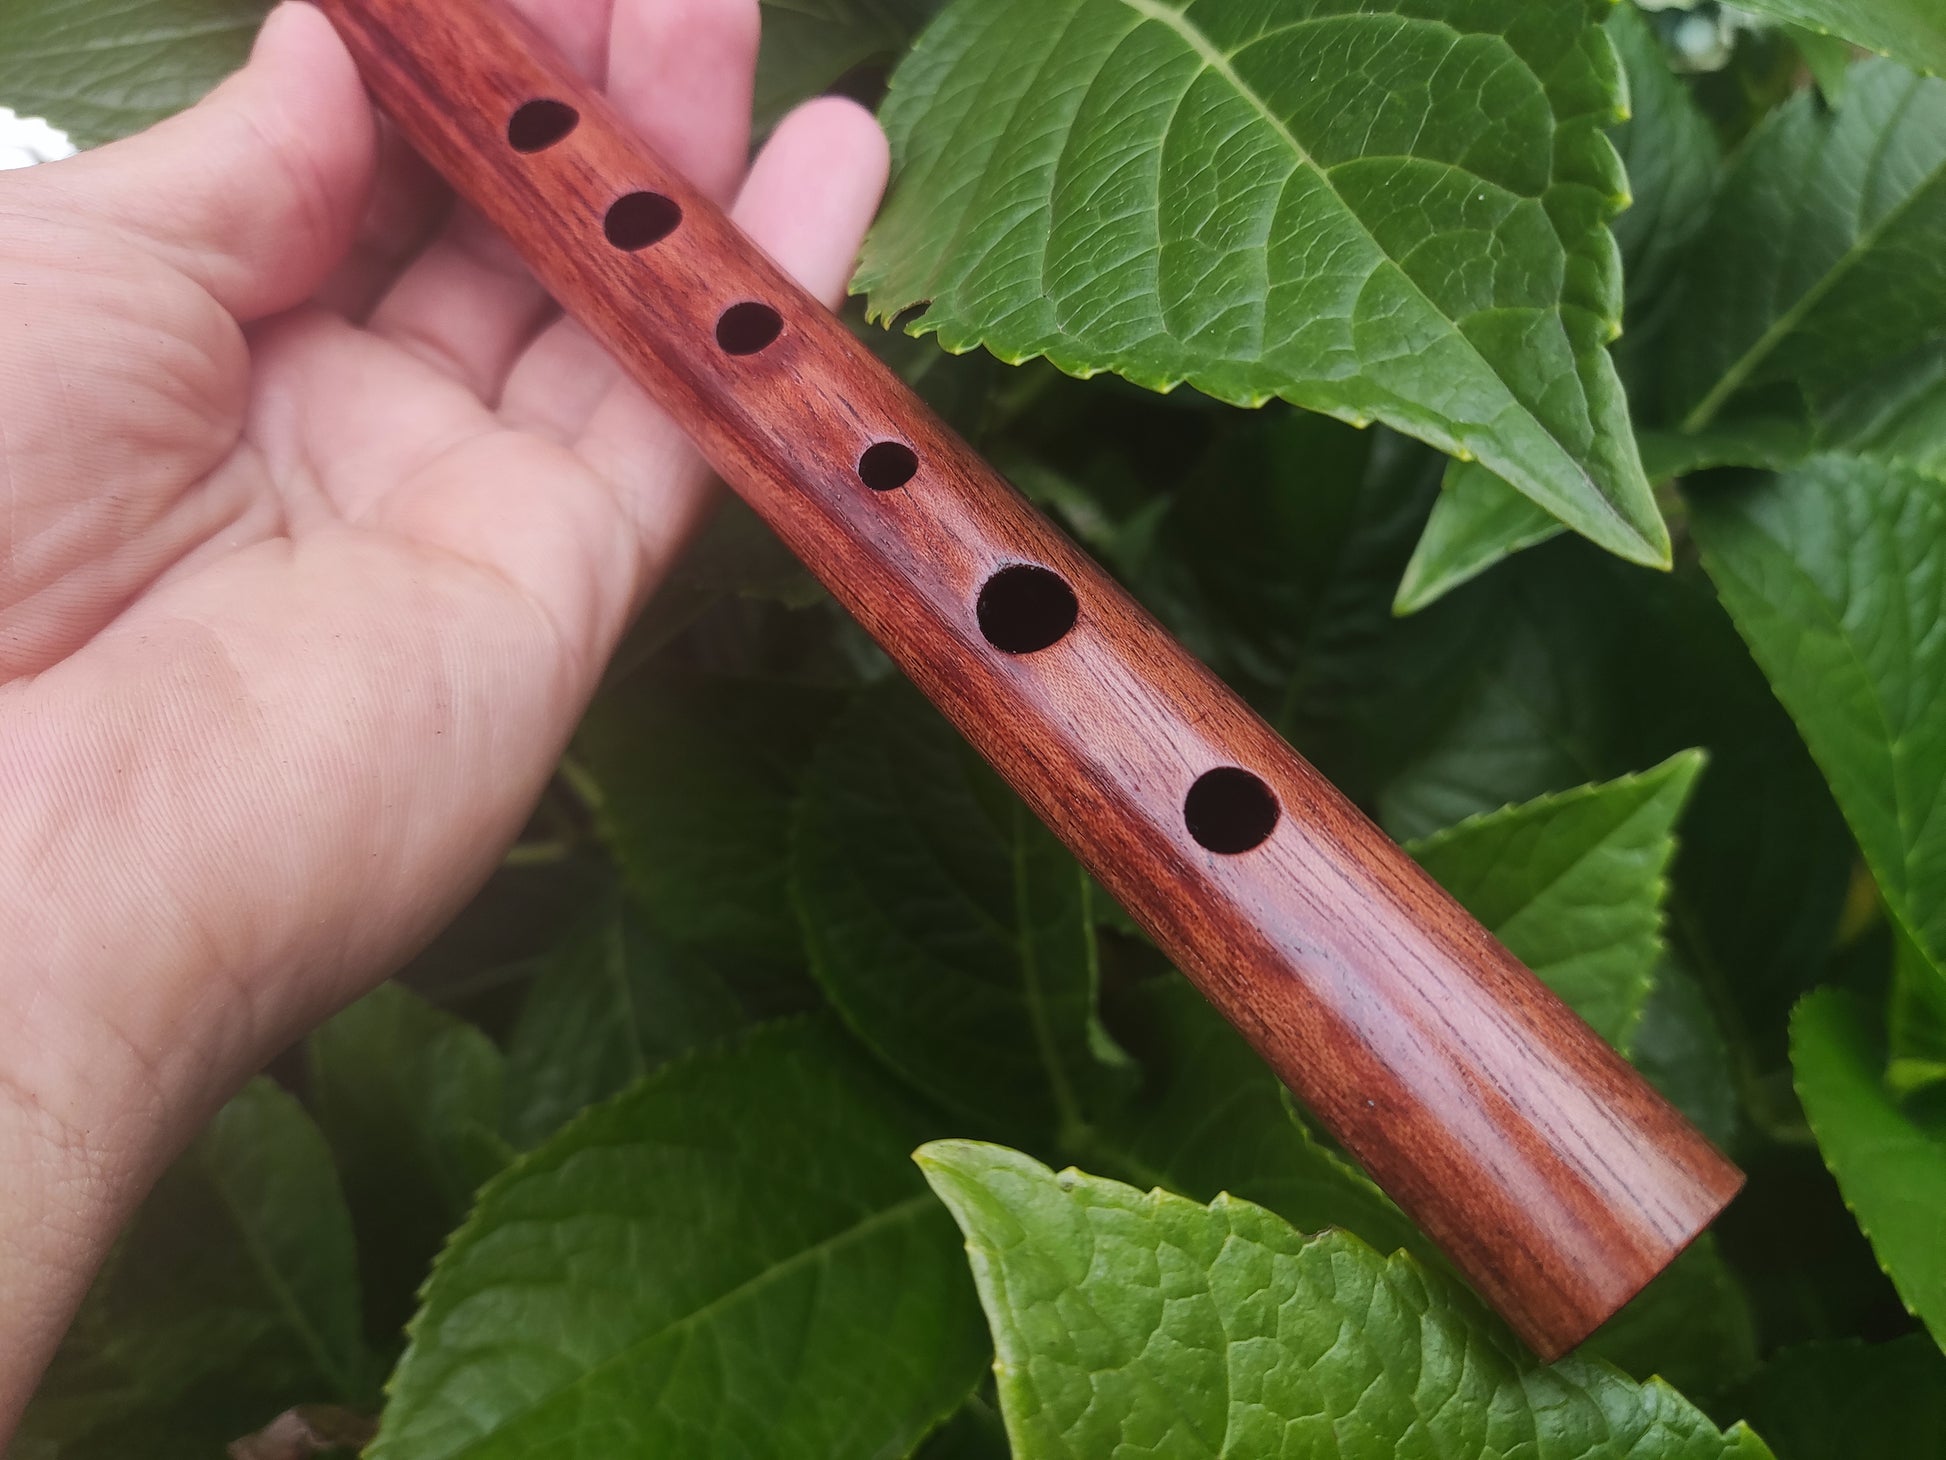 Penny Whistle in High C. Handmade Tunable Tin Whistle, for Irish